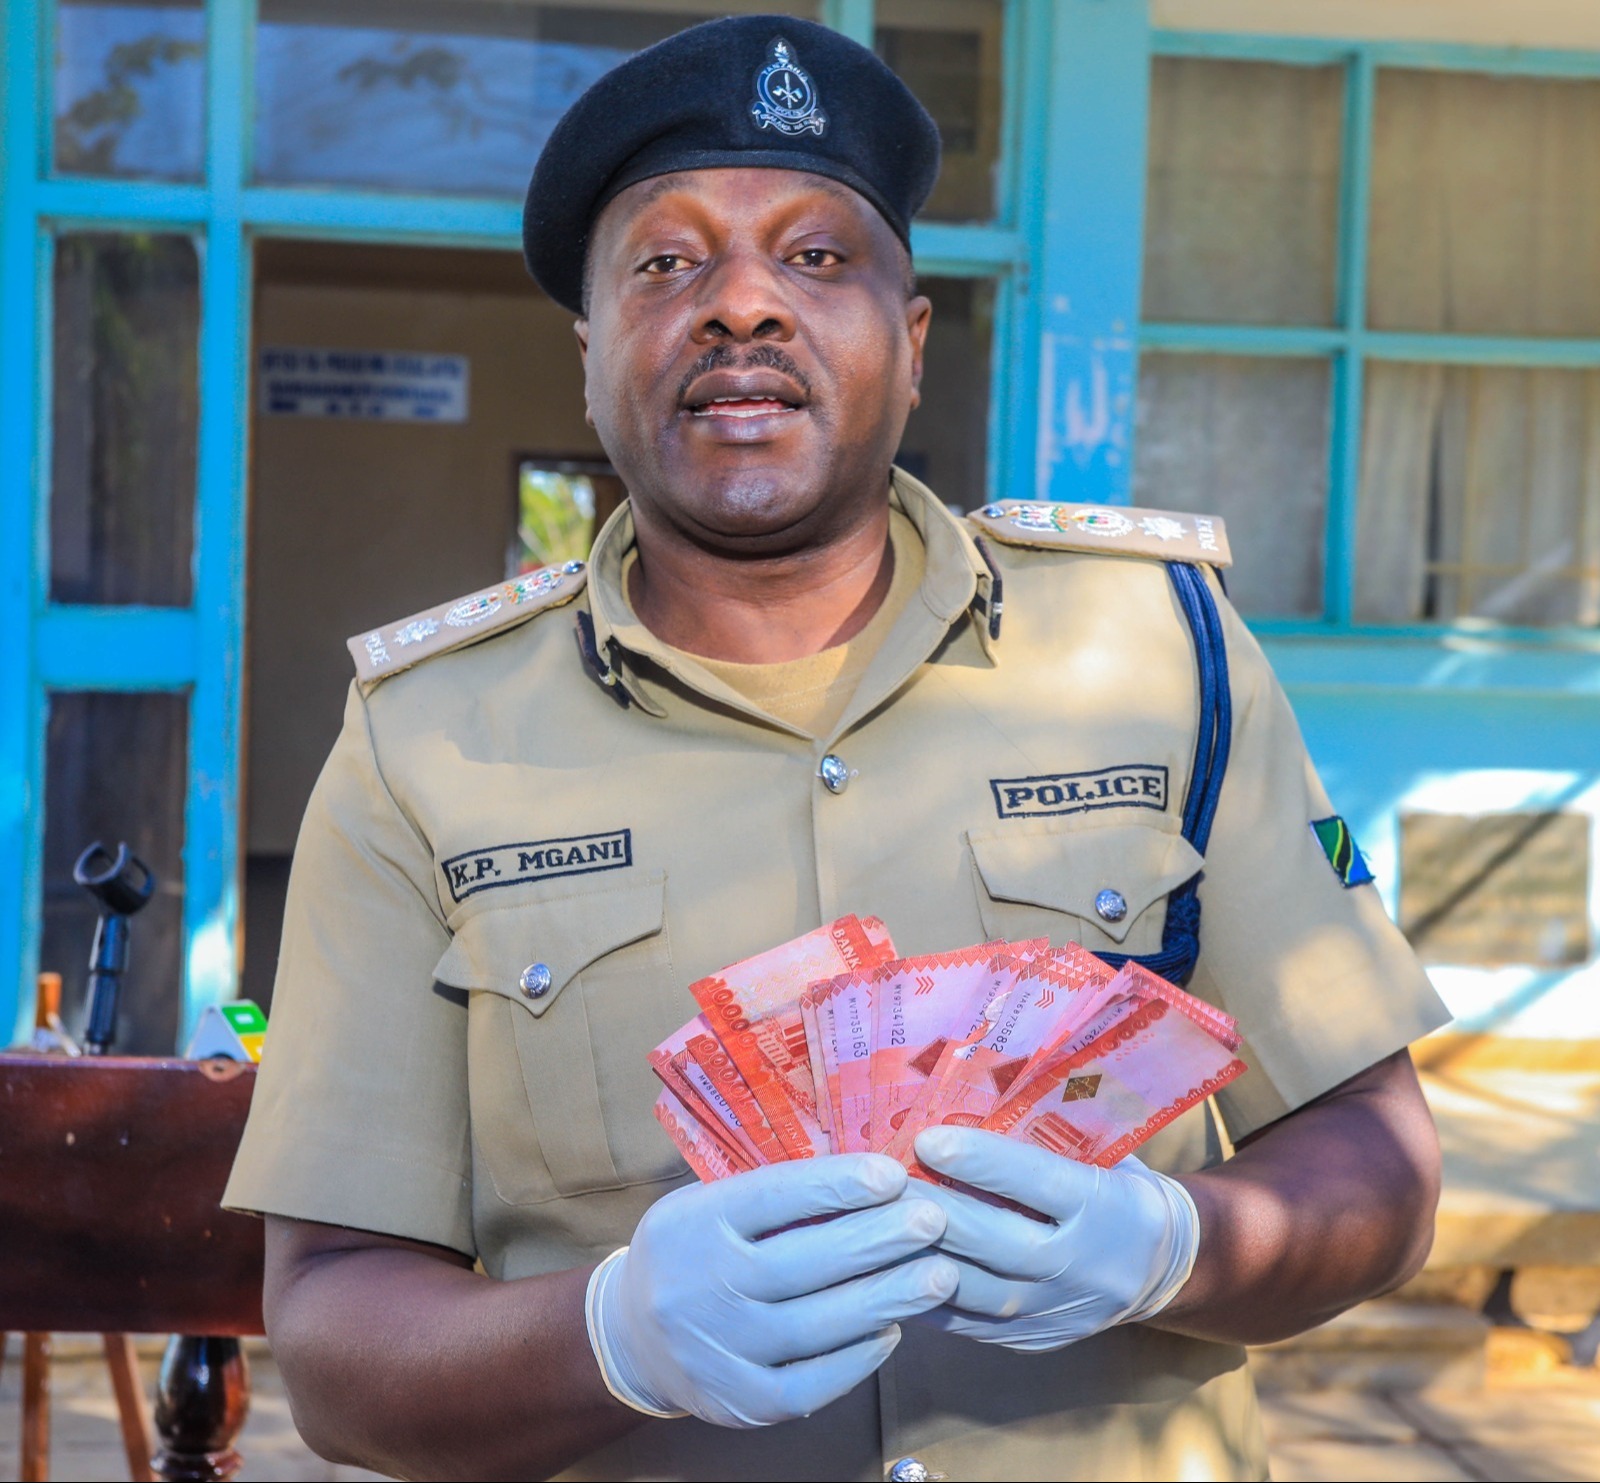 Shinyanga acting Regional Police Commander Kennedy Mgani shows journalists in Shinyanga municipality on Wednesday what he said were fake 10,000/- banknotes with a street value totalling 420,000/- 